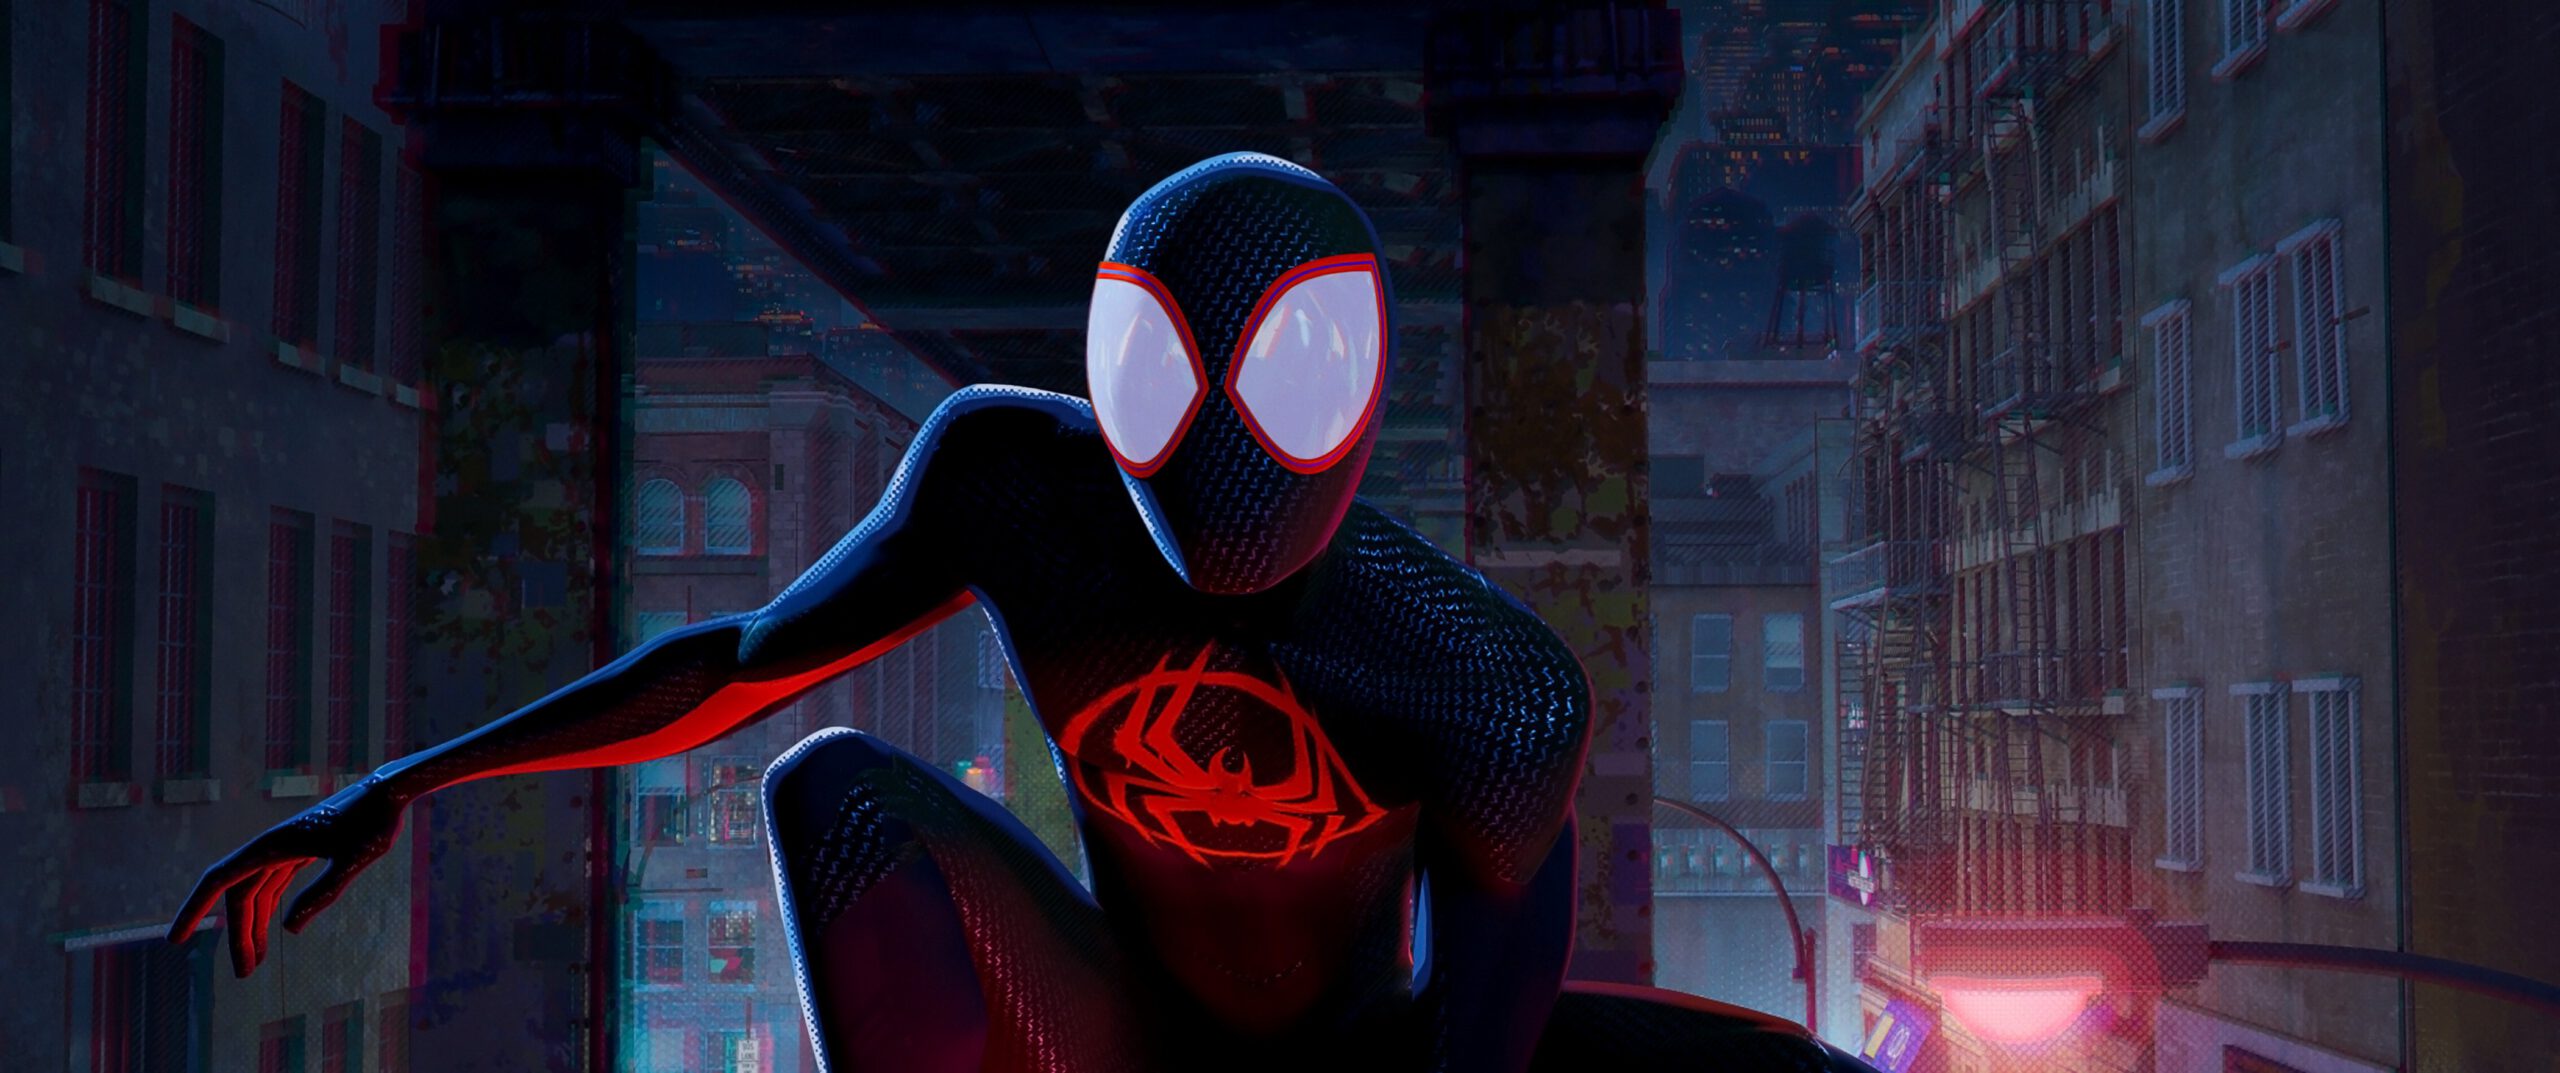 Spider-Man/Miles Morales in 'Across the Spider-Verse'